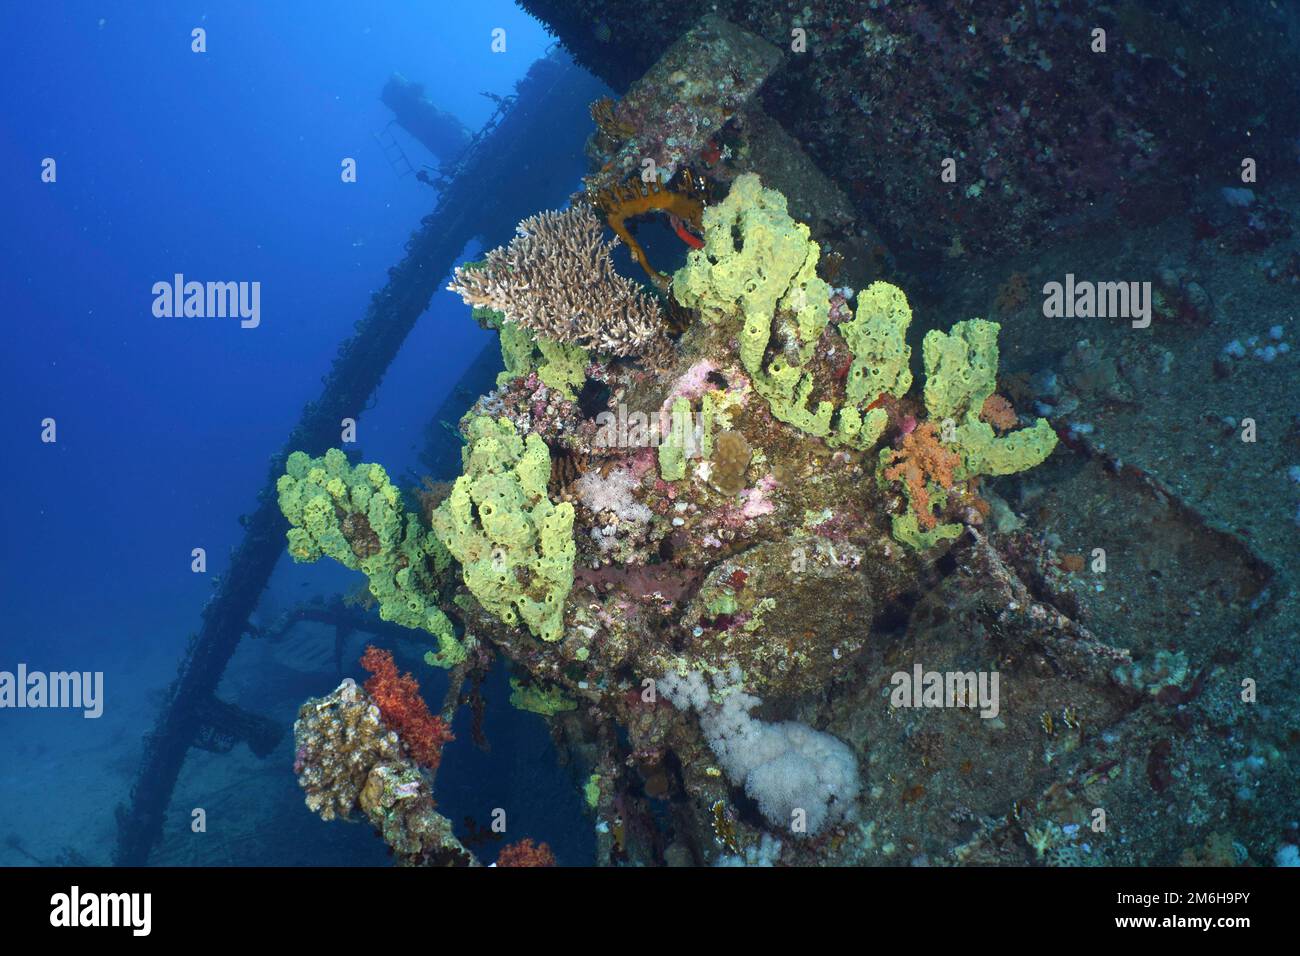 Yellow sponges, small polyp stony coral (Acropora) and red tree corals (Dendronephthya) on the wreck of the Giannis D. Dive site Giannis D wreck Stock Photo